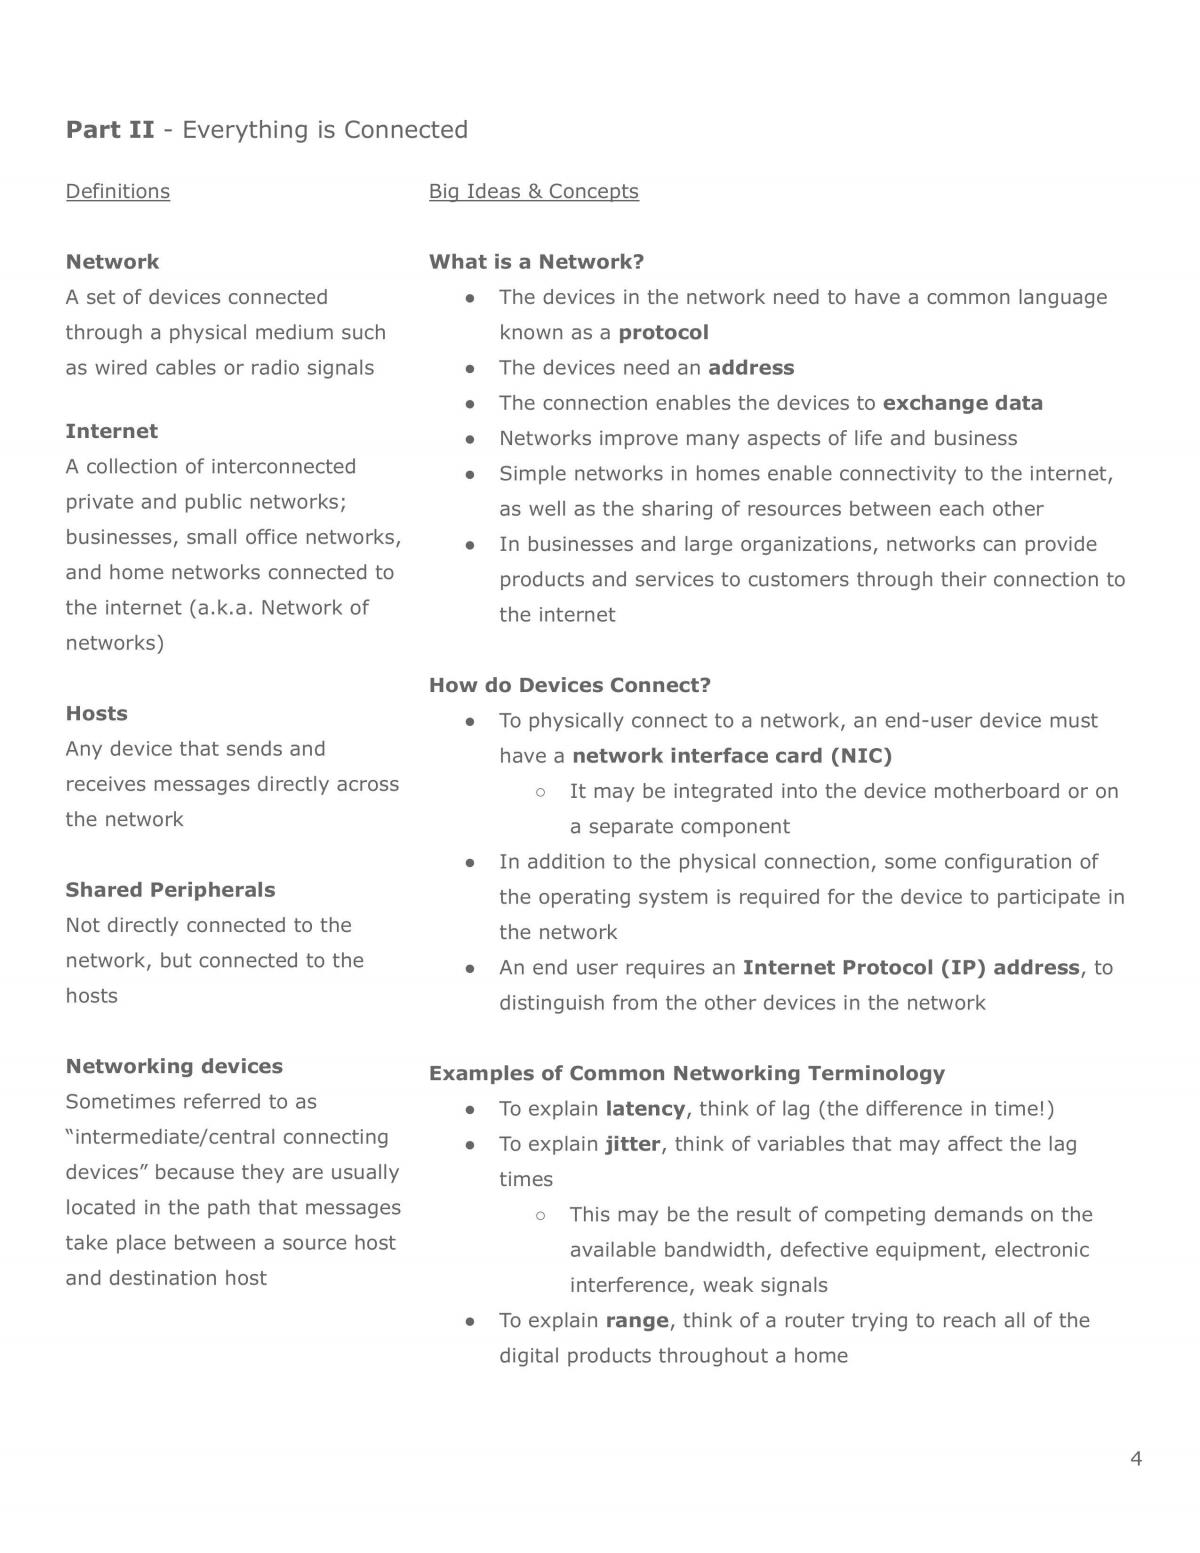 Digital Societies Complete Course Notes - Page 4